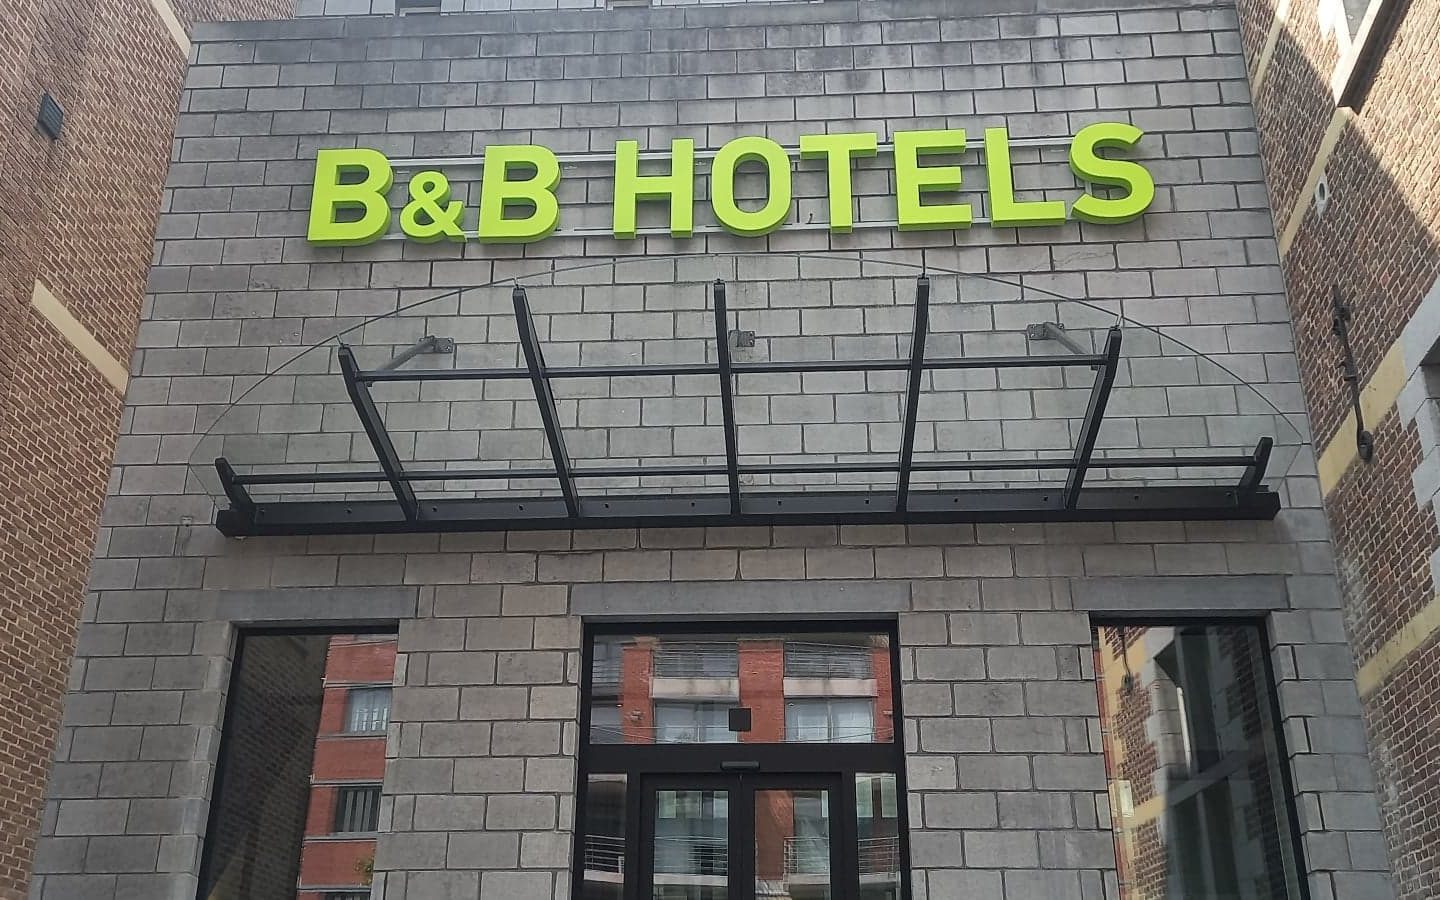 A brand new wheelchair accessible B&B Hotel in Hasselt. Check ✓.